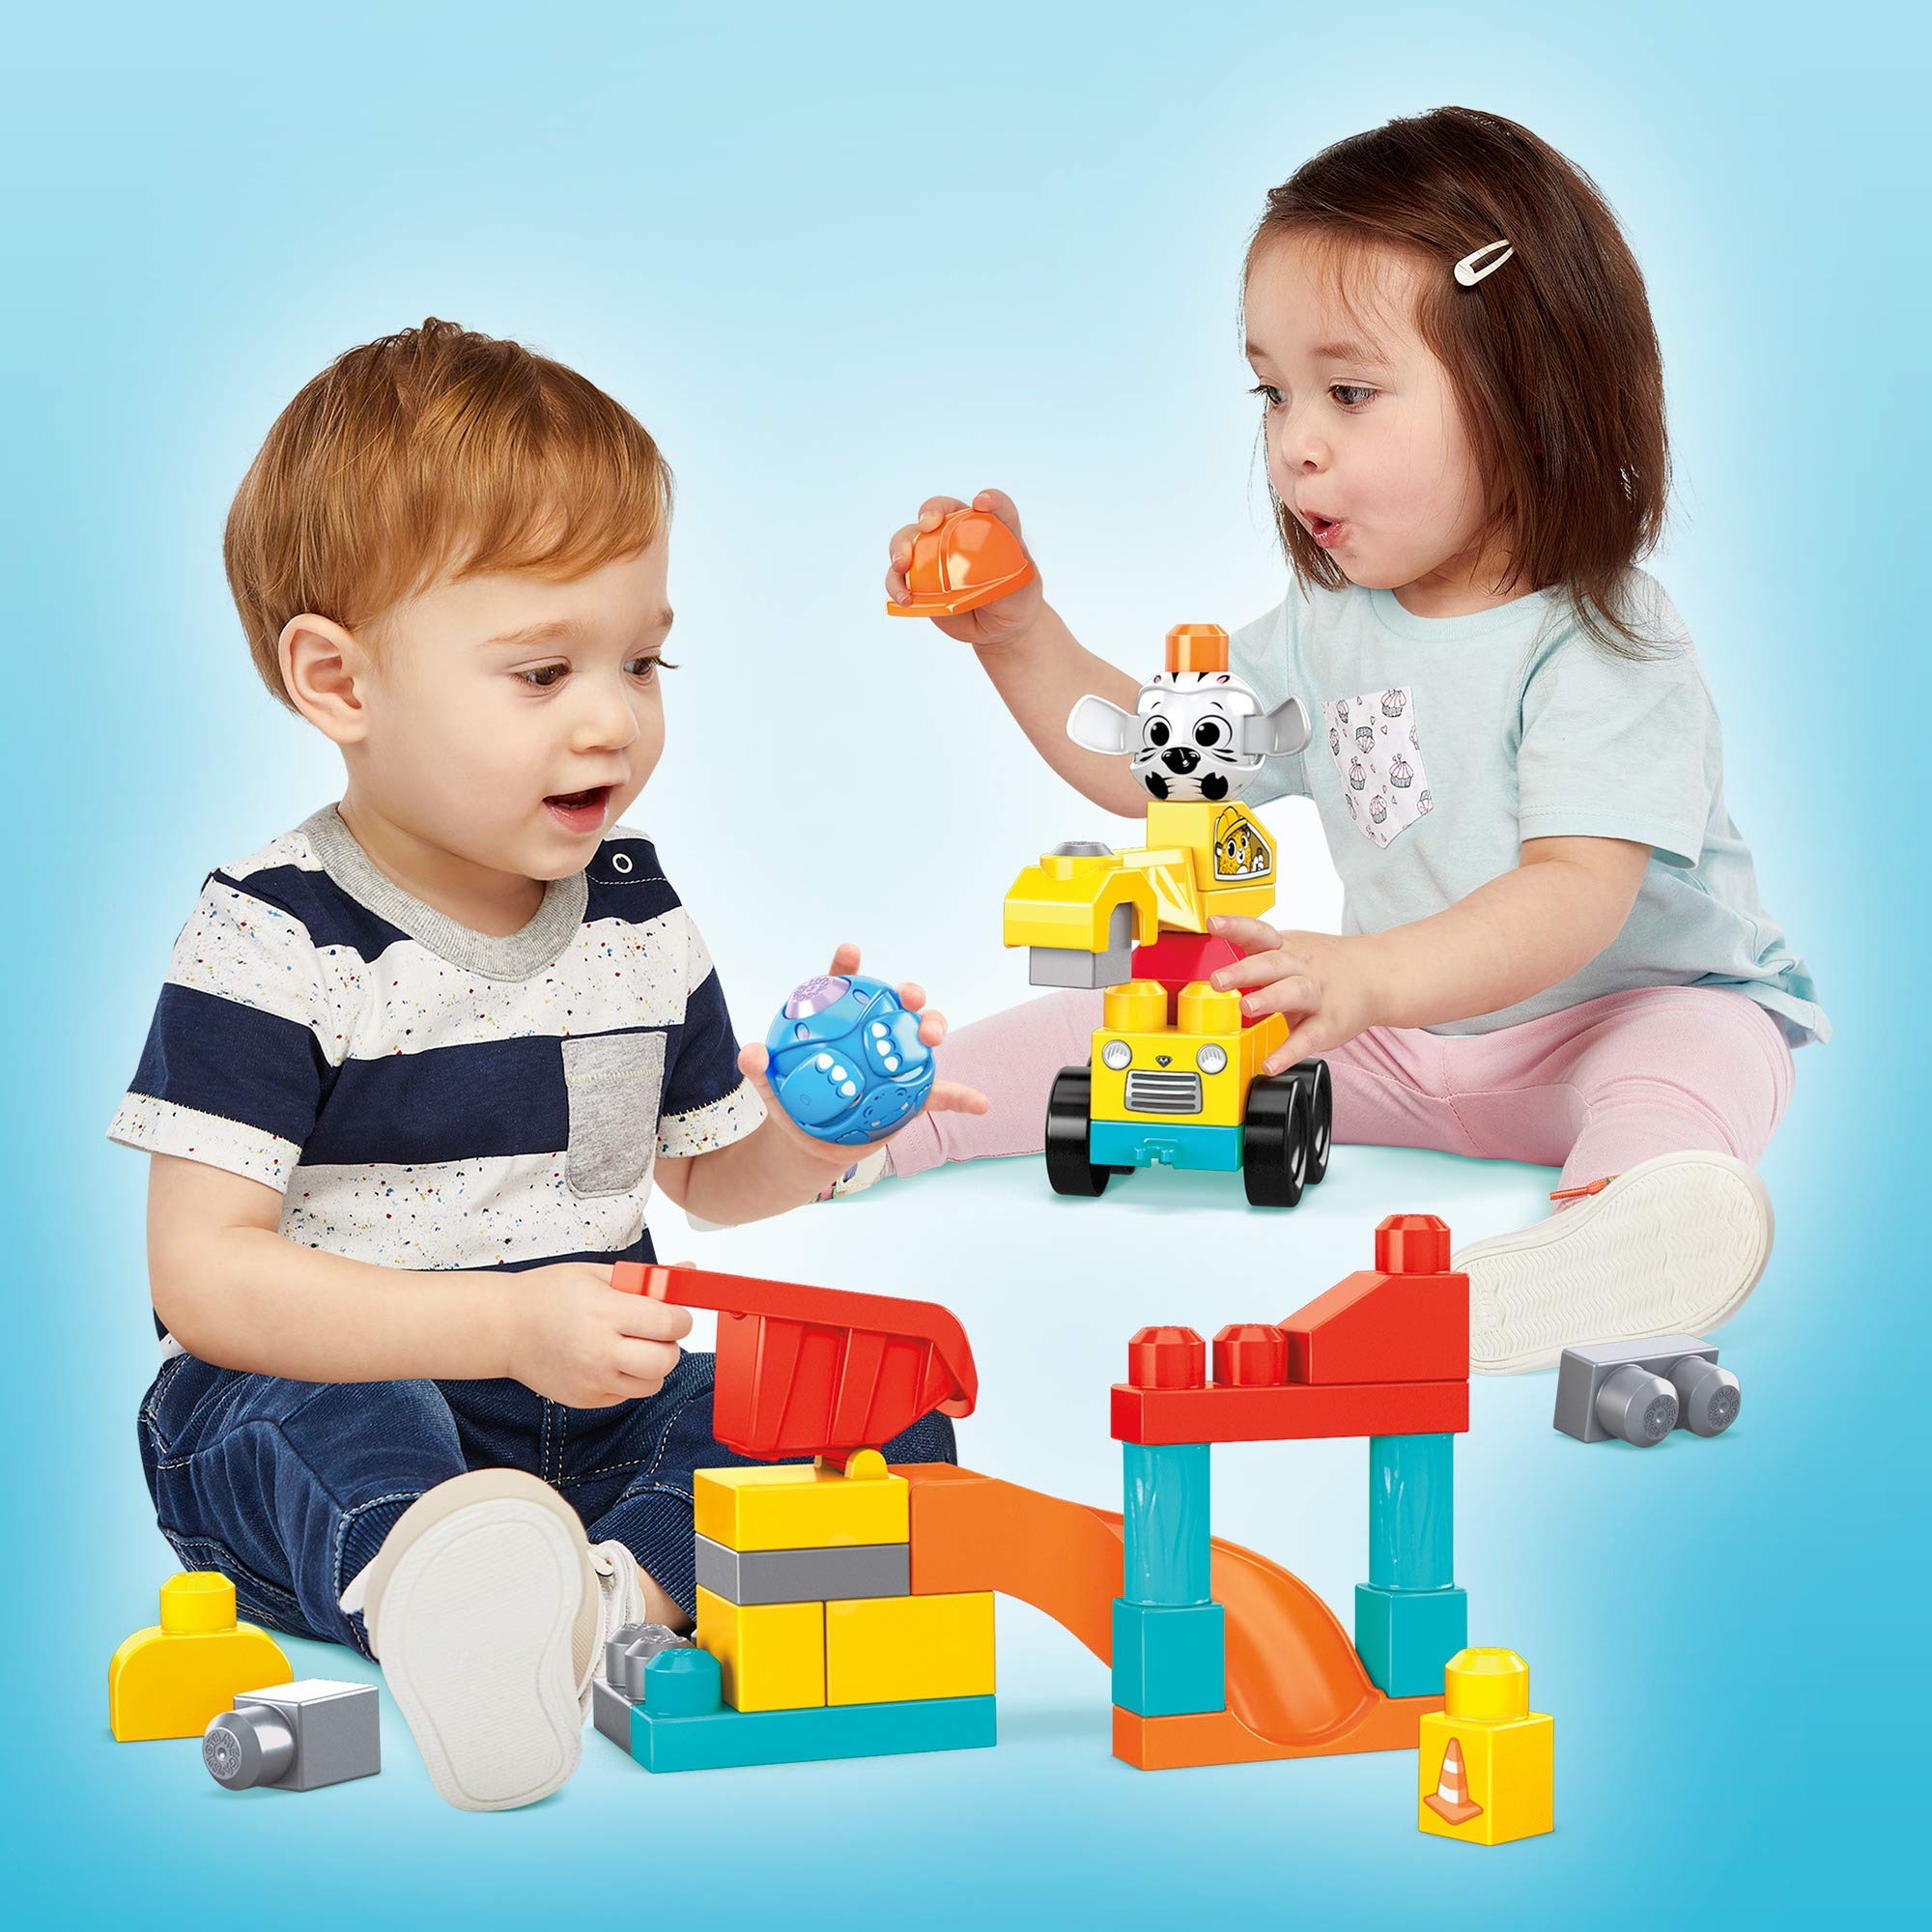 Mega Bloks Peek A Blocks Construction Site, Building Toys for Toddlers for ages 1 years and up (30 Pieces)